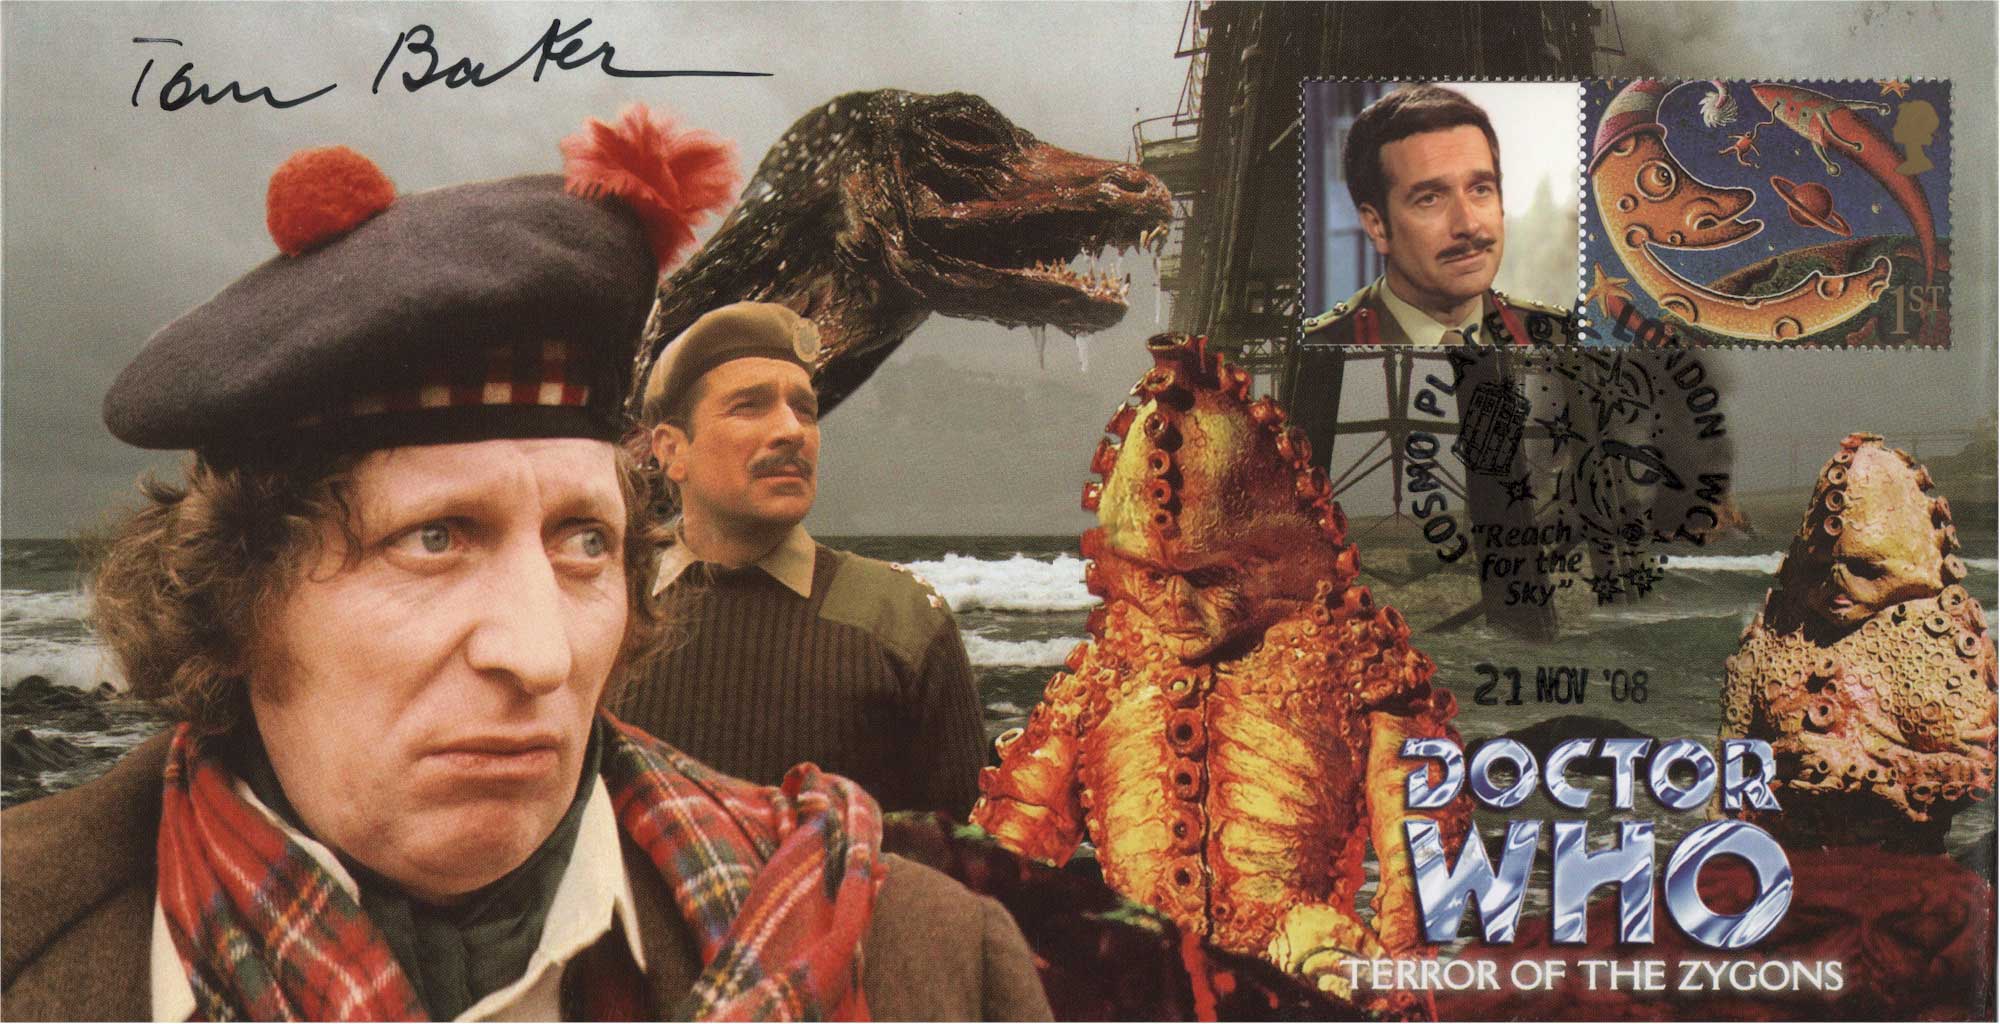 Doctor Who Terror of the Zygons Collectable Stamp Cover Signed by TOM BAKER